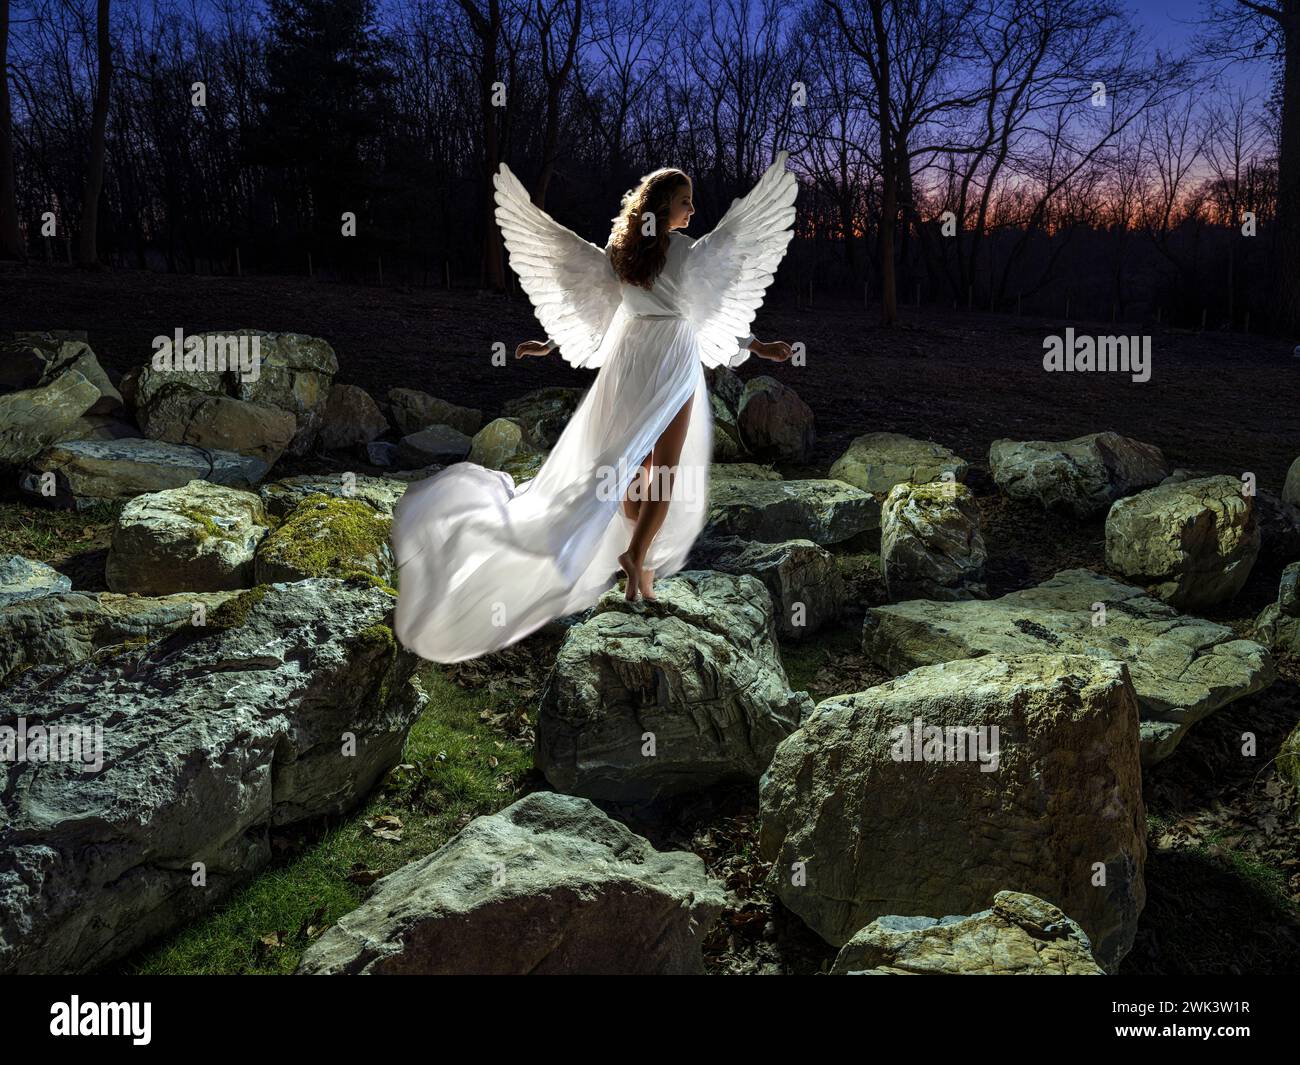 Heavenly angel in rocky field with dramatic lighting Stock Photo